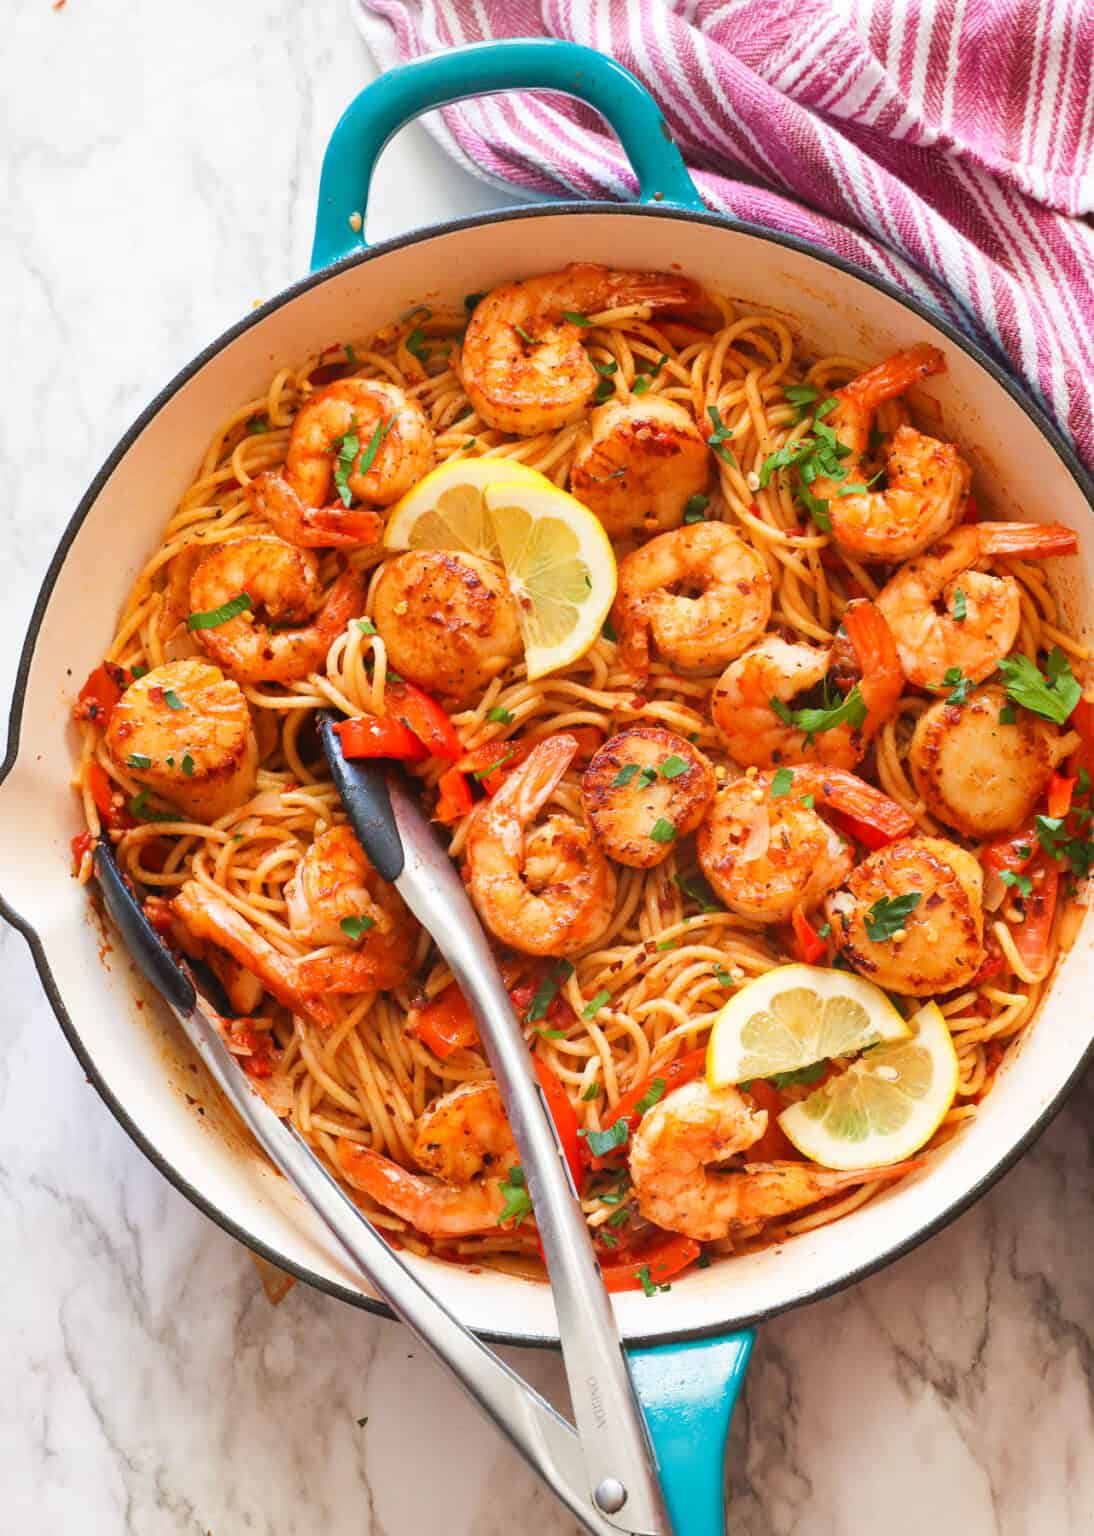 Seafood Pasta - Immaculate Bites